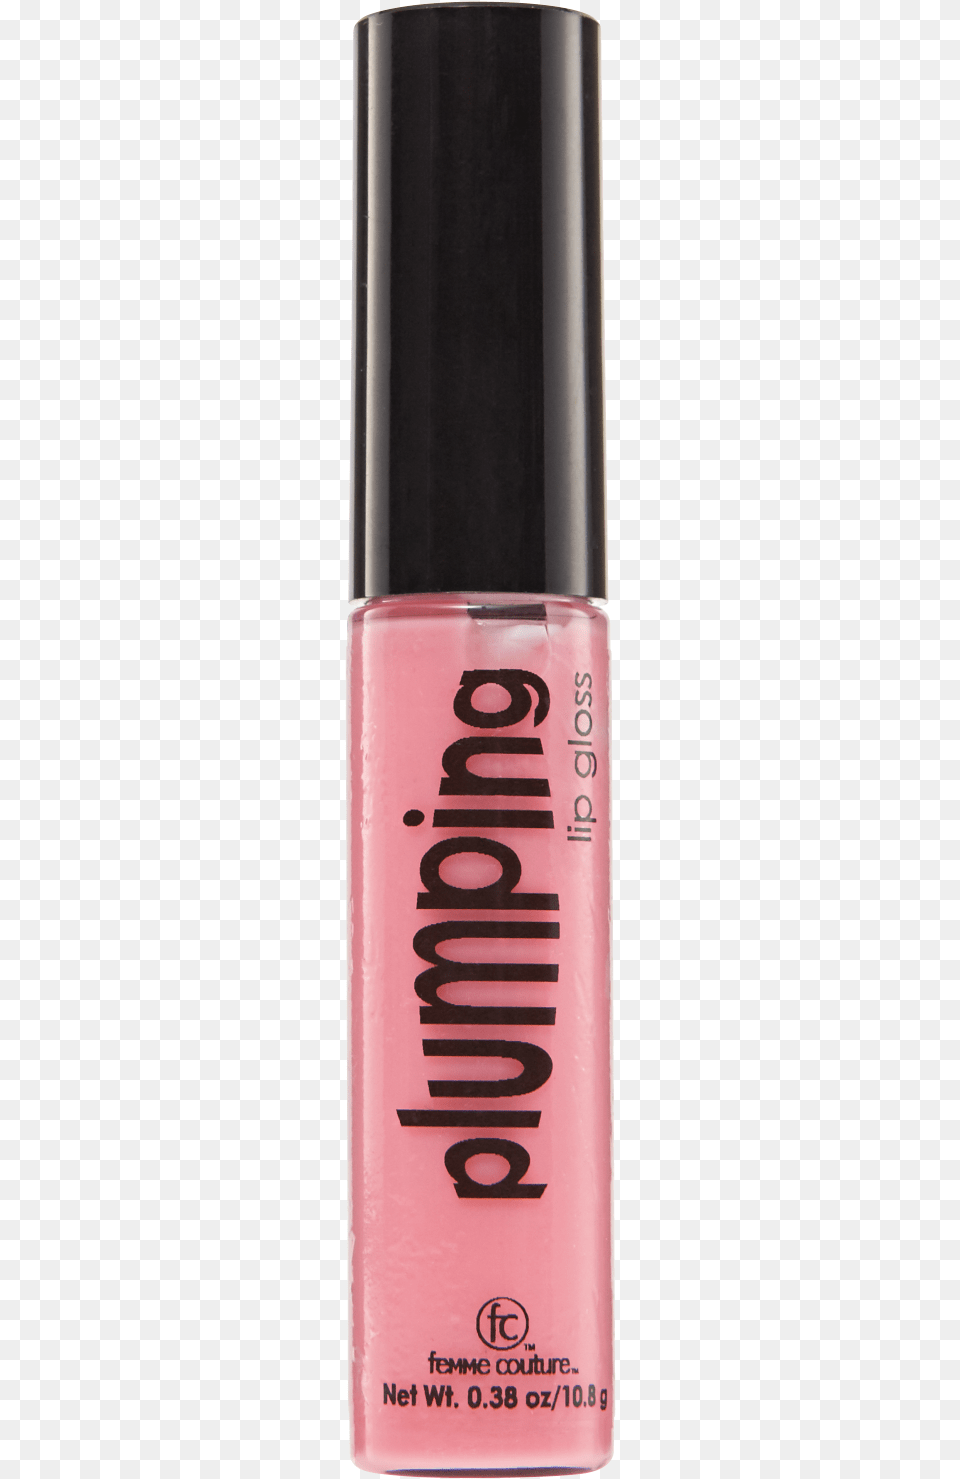 Loreal Infallible Pro Gloss Suede, Cosmetics Png Image